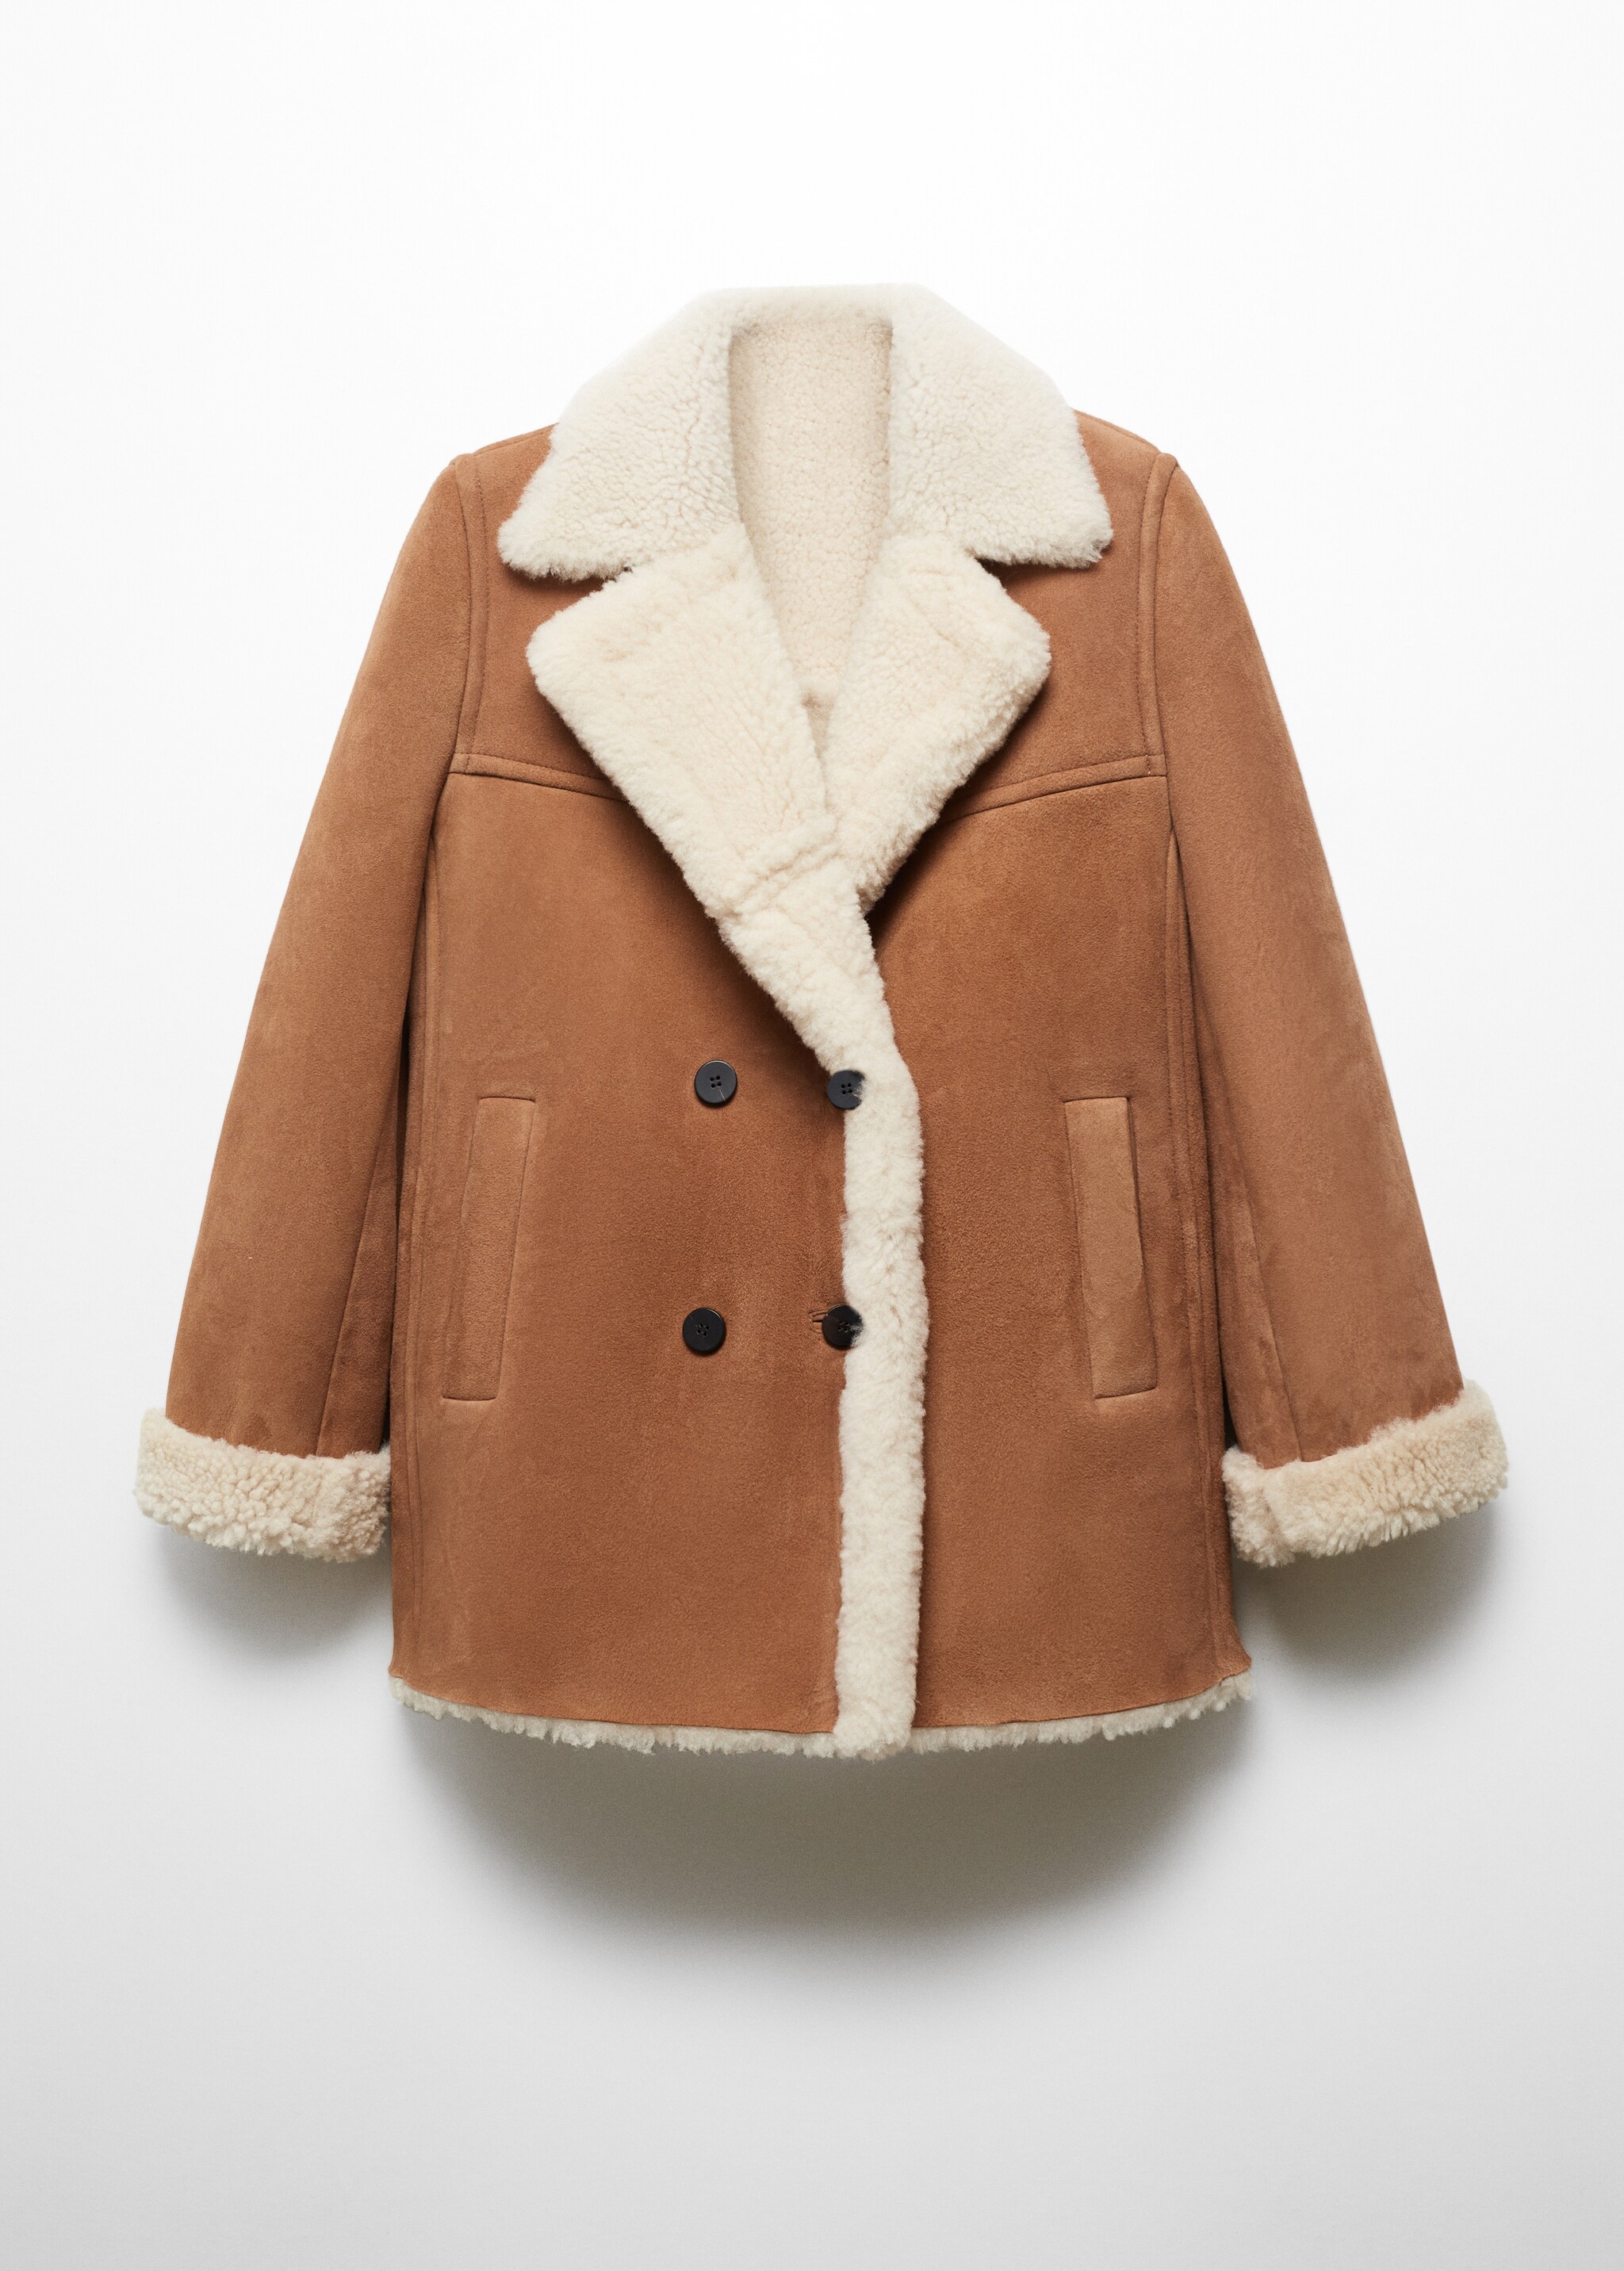 Shearling-lined coat - Article without model